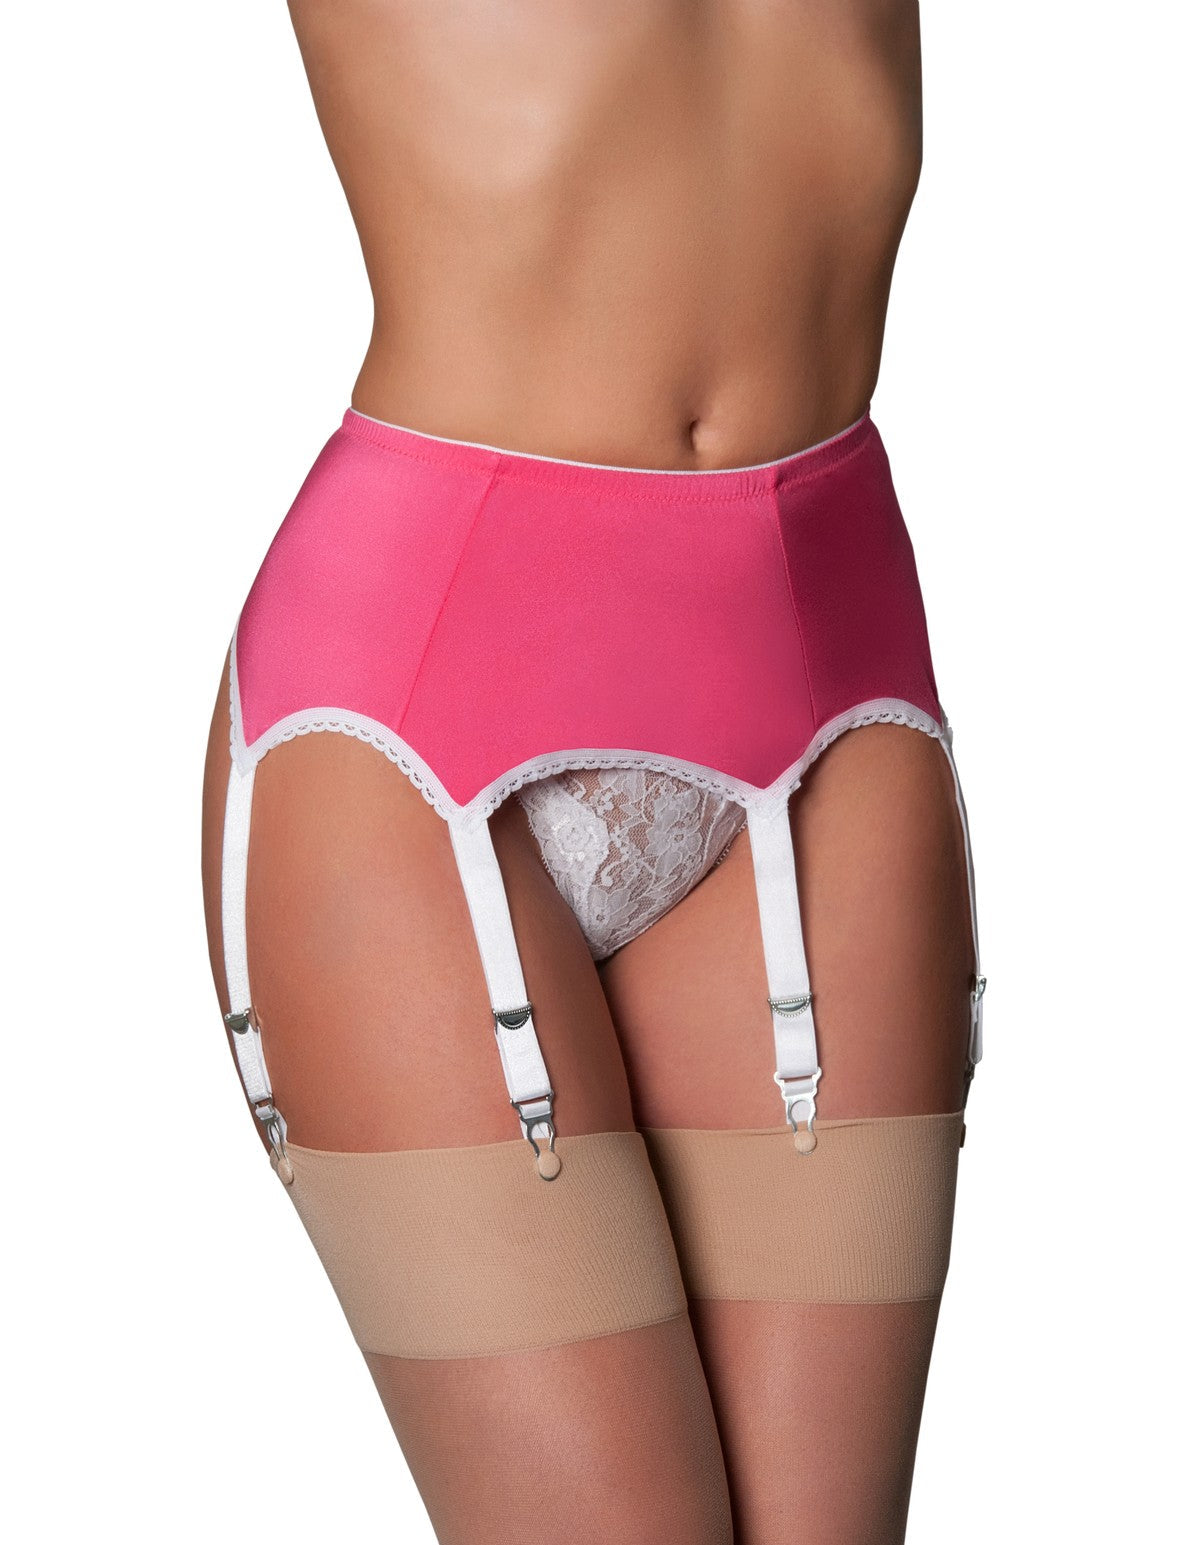 Nylon Dreams NDL59 Pink and White Lace 6 Strap Suspender Belt